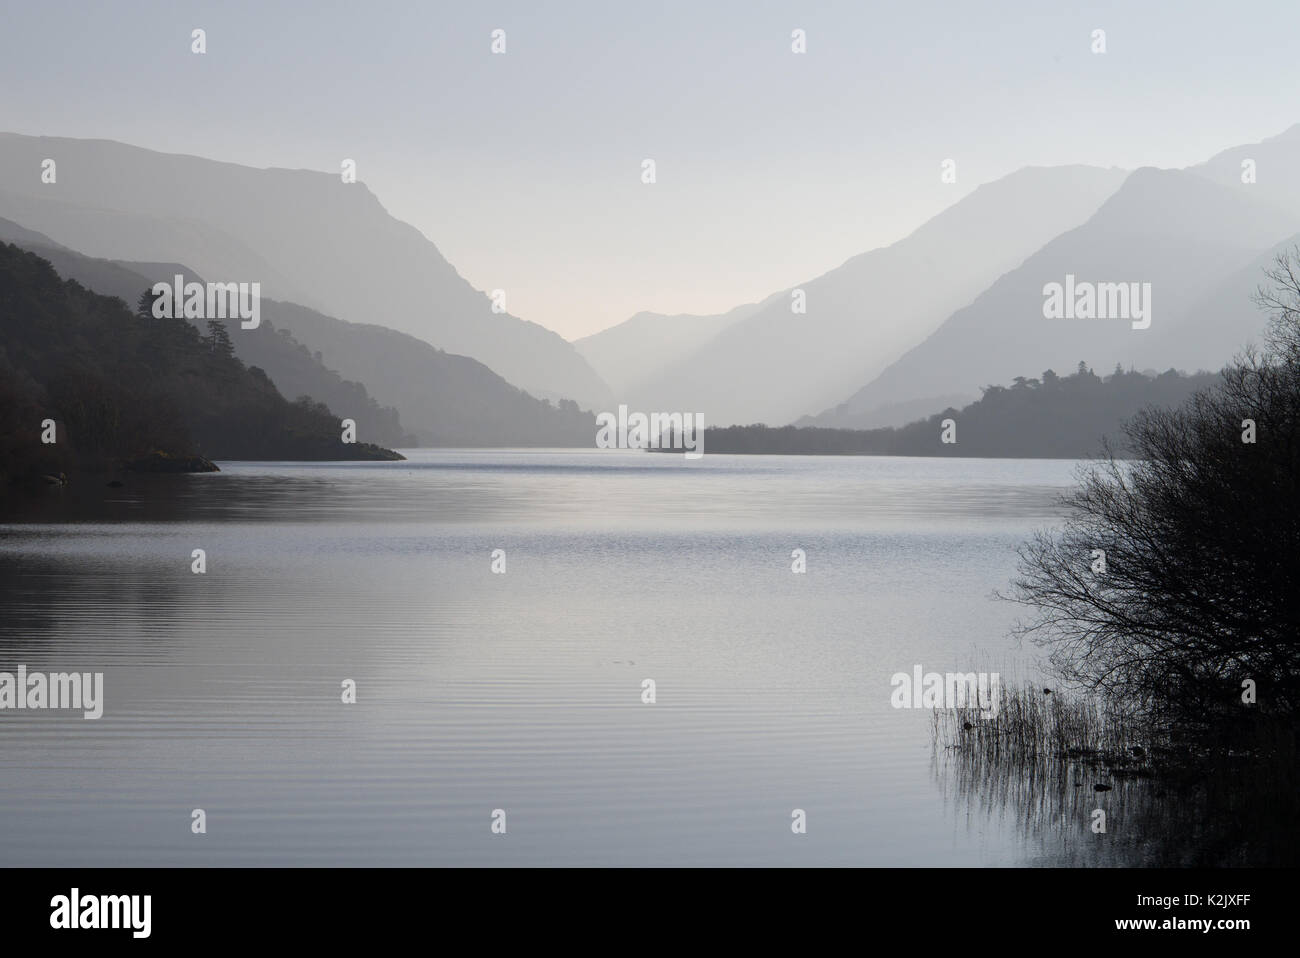 Llyn Padarn is a large  glacially formed lake in Snowdonia here seen looking towards mount Snowdon and the Llanberis Pass. Stock Photo